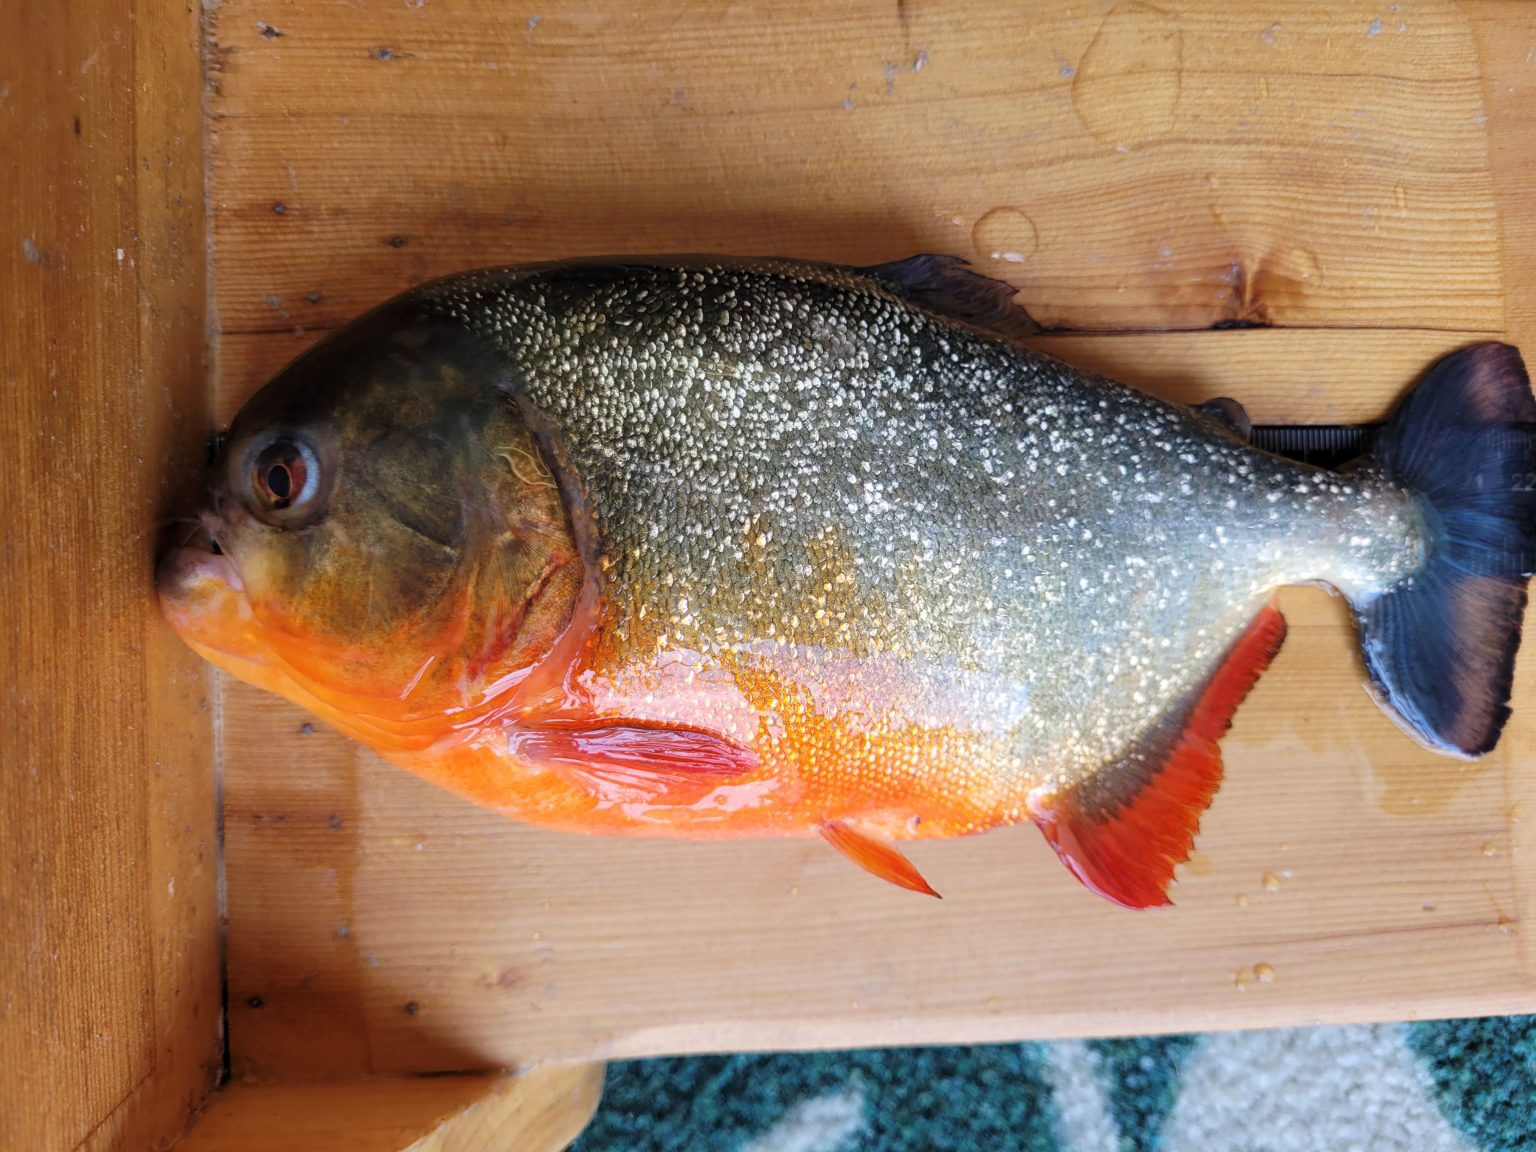 The discovery of a red piranha in an LSU lake has biologists on high alert.